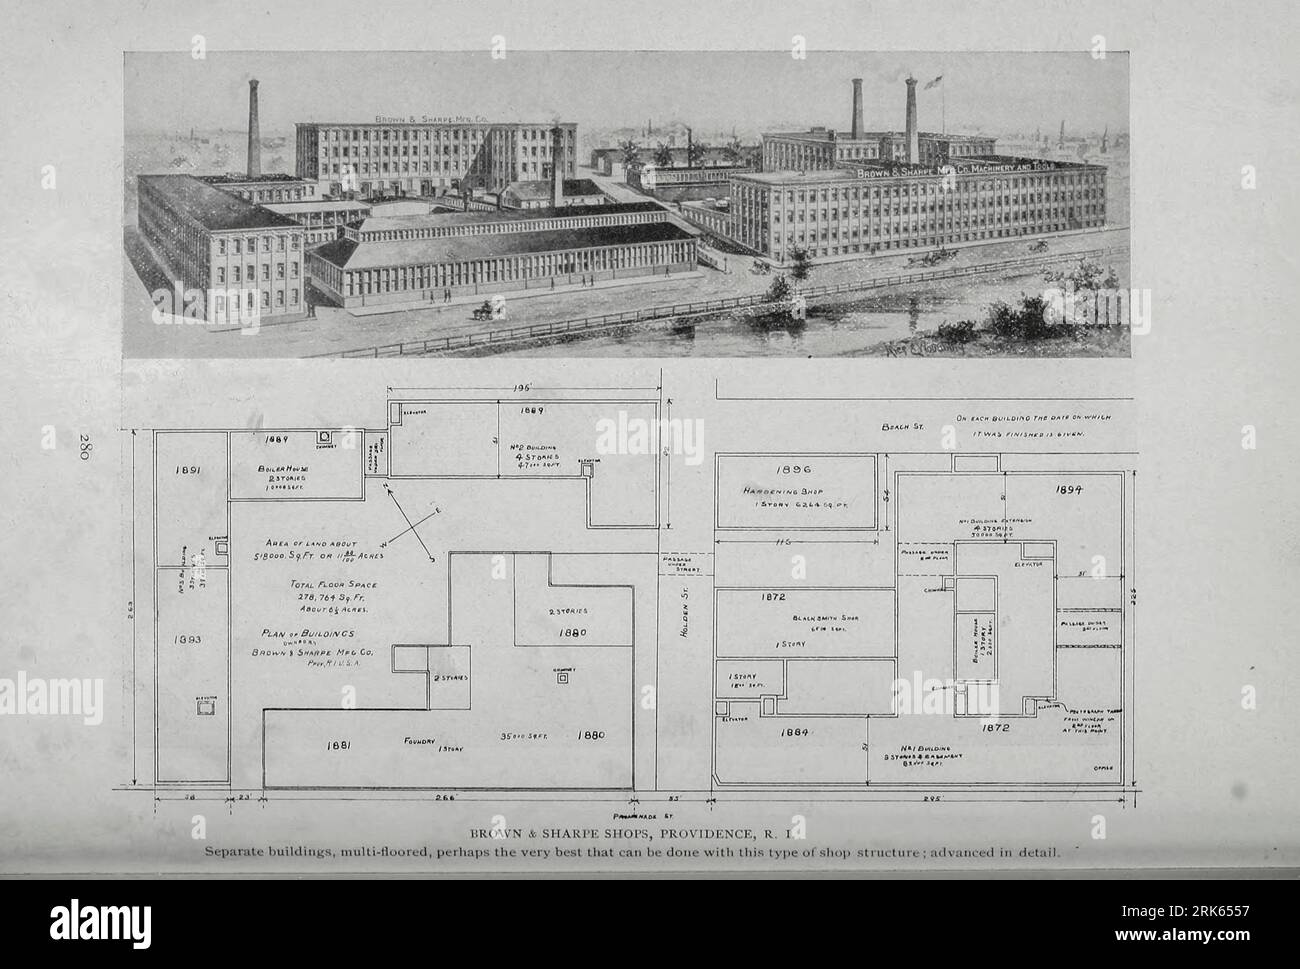 Brown & Sharpe Shops, Providence RI Separate buildings multi floored from the Article MODERN MACHINE-SHOP ECONOMICS PRIME REQUISITES OF SHOP CONSTRUCTION By Horace L. Arnold from The Engineering Magazine DEVOTED TO INDUSTRIAL PROGRESS Volume XI October 1896 NEW YORK The Engineering Magazine Co Stock Photo